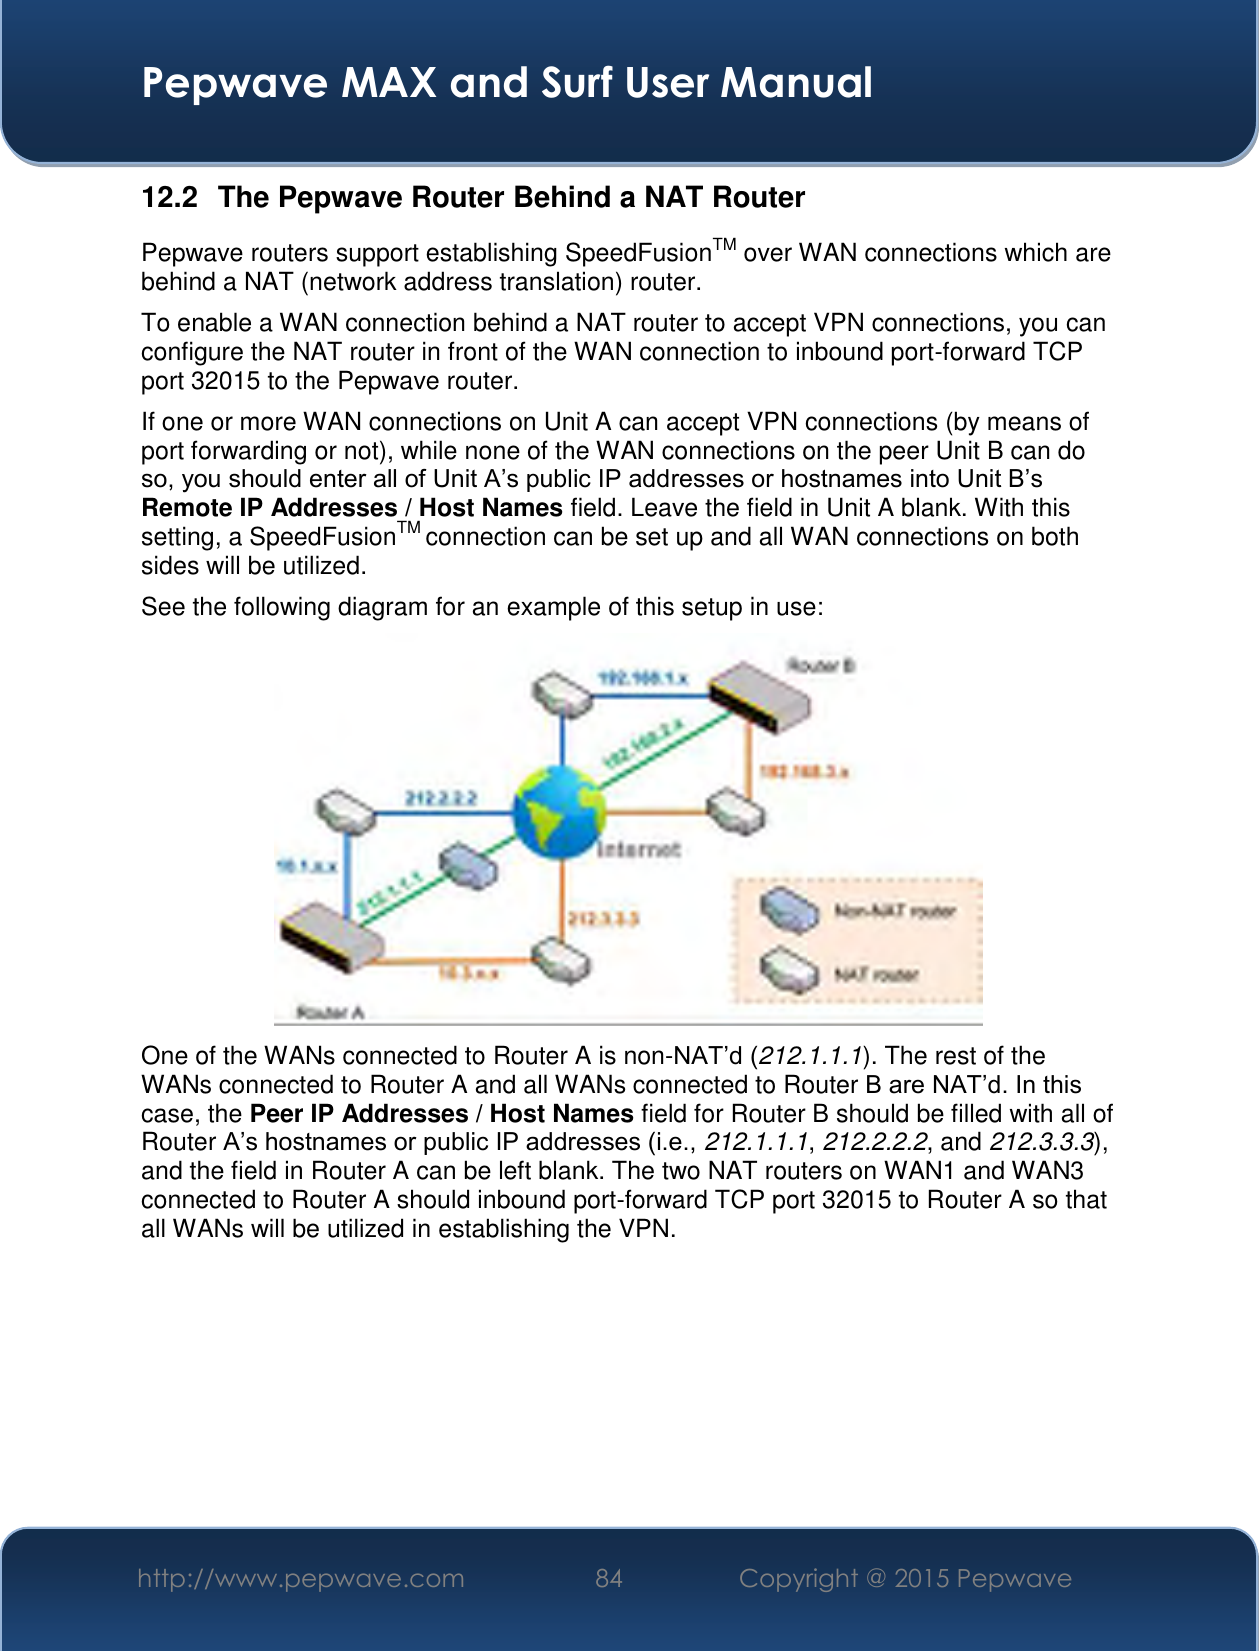  Pepwave MAX and Surf User Manual http://www.pepwave.com 84   Copyright @ 2015 Pepwave   12.2  The Pepwave Router Behind a NAT Router Pepwave routers support establishing SpeedFusionTM over WAN connections which are behind a NAT (network address translation) router. To enable a WAN connection behind a NAT router to accept VPN connections, you can configure the NAT router in front of the WAN connection to inbound port-forward TCP port 32015 to the Pepwave router. If one or more WAN connections on Unit A can accept VPN connections (by means of port forwarding or not), while none of the WAN connections on the peer Unit B can do so, you should enter all of Unit A’s public IP addresses or hostnames into Unit B’s Remote IP Addresses / Host Names field. Leave the field in Unit A blank. With this setting, a SpeedFusionTM connection can be set up and all WAN connections on both sides will be utilized. See the following diagram for an example of this setup in use:  One of the WANs connected to Router A is non-NAT’d (212.1.1.1). The rest of the WANs connected to Router A and all WANs connected to Router B are NAT’d. In this case, the Peer IP Addresses / Host Names field for Router B should be filled with all of Router A’s hostnames or public IP addresses (i.e., 212.1.1.1, 212.2.2.2, and 212.3.3.3), and the field in Router A can be left blank. The two NAT routers on WAN1 and WAN3 connected to Router A should inbound port-forward TCP port 32015 to Router A so that all WANs will be utilized in establishing the VPN.       